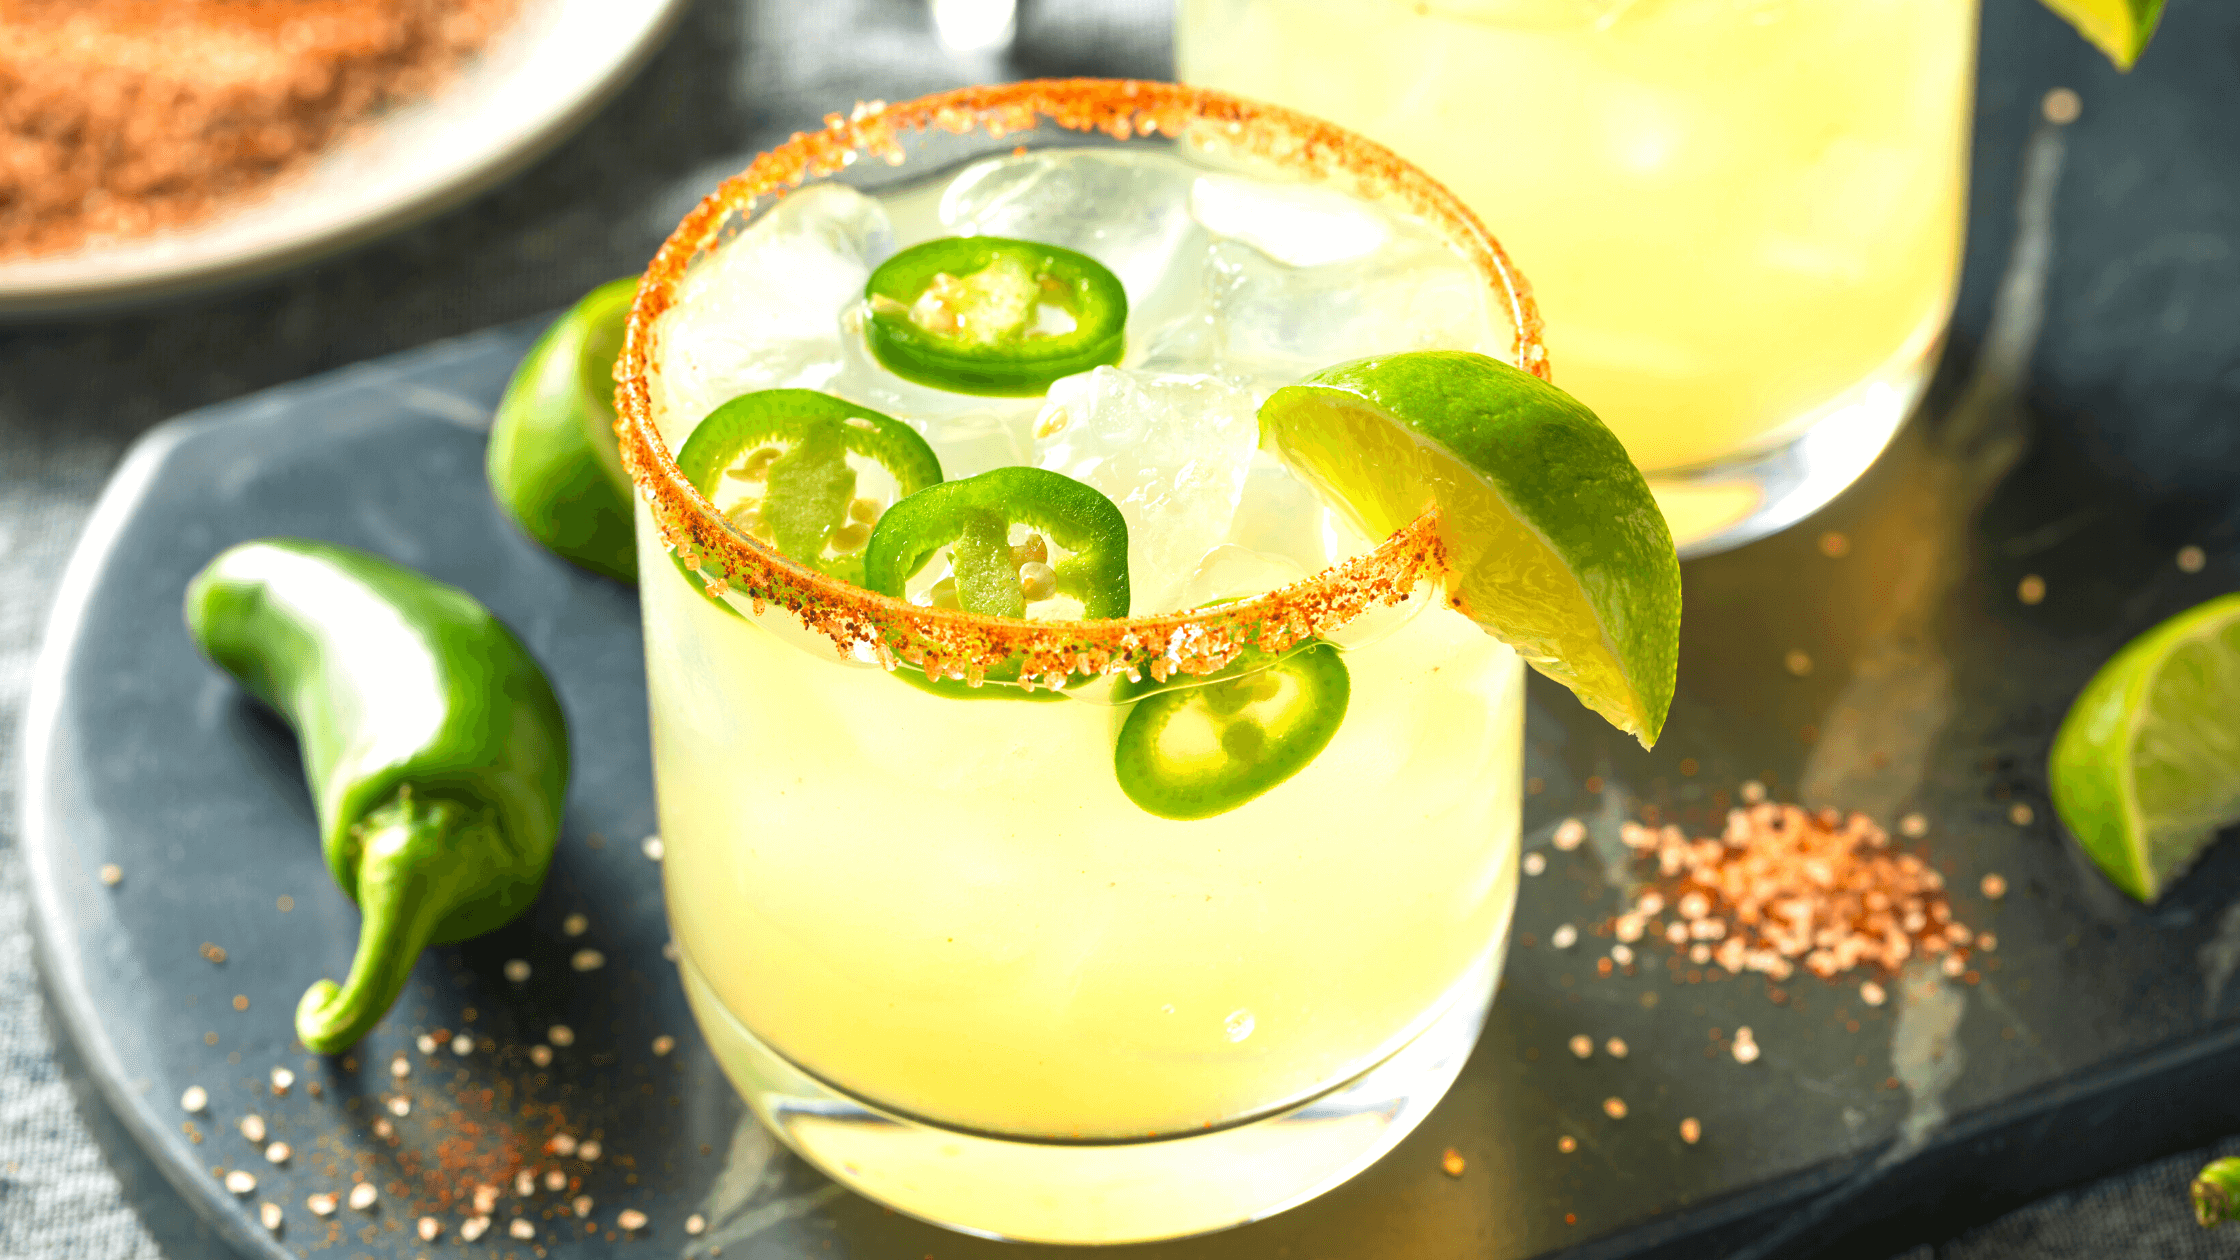 A Spicy Margarita Beer Cocktail Recipe with Jalapeño Saison